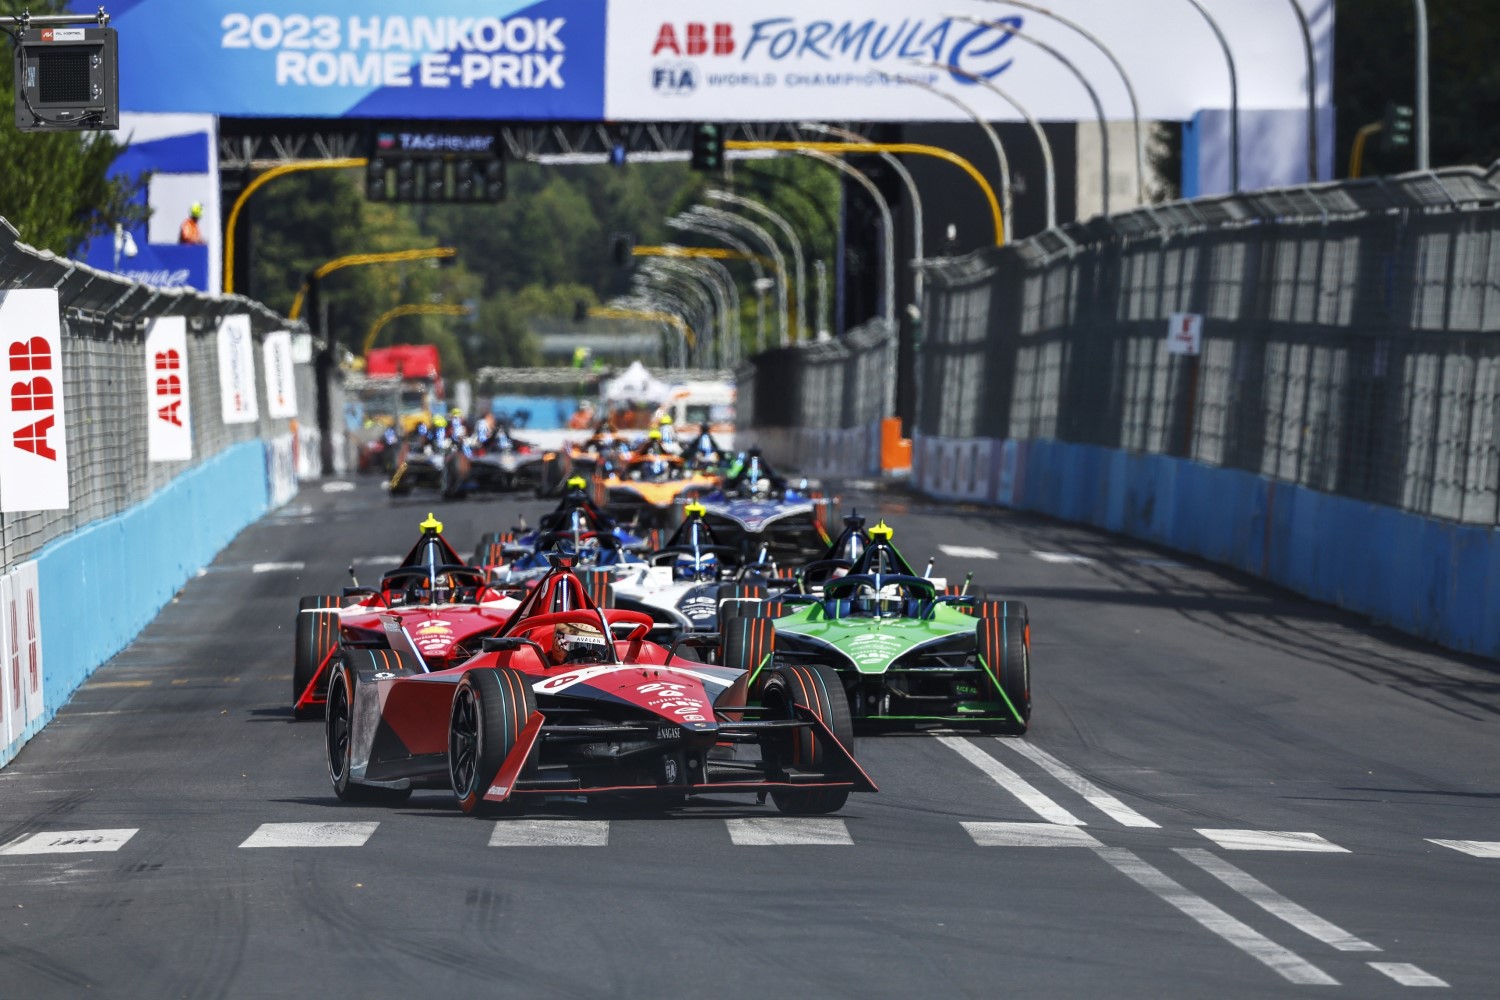 Jake Dennis, Avalanche Andretti Formula E, Porsche 99 X Electric Gen3 during the Rome ePrix II at Circuito Cittadino dell'EUR on Sunday July 16, 2023 in Rome, Italy. (Photo by Sam Bloxham / LAT Images)